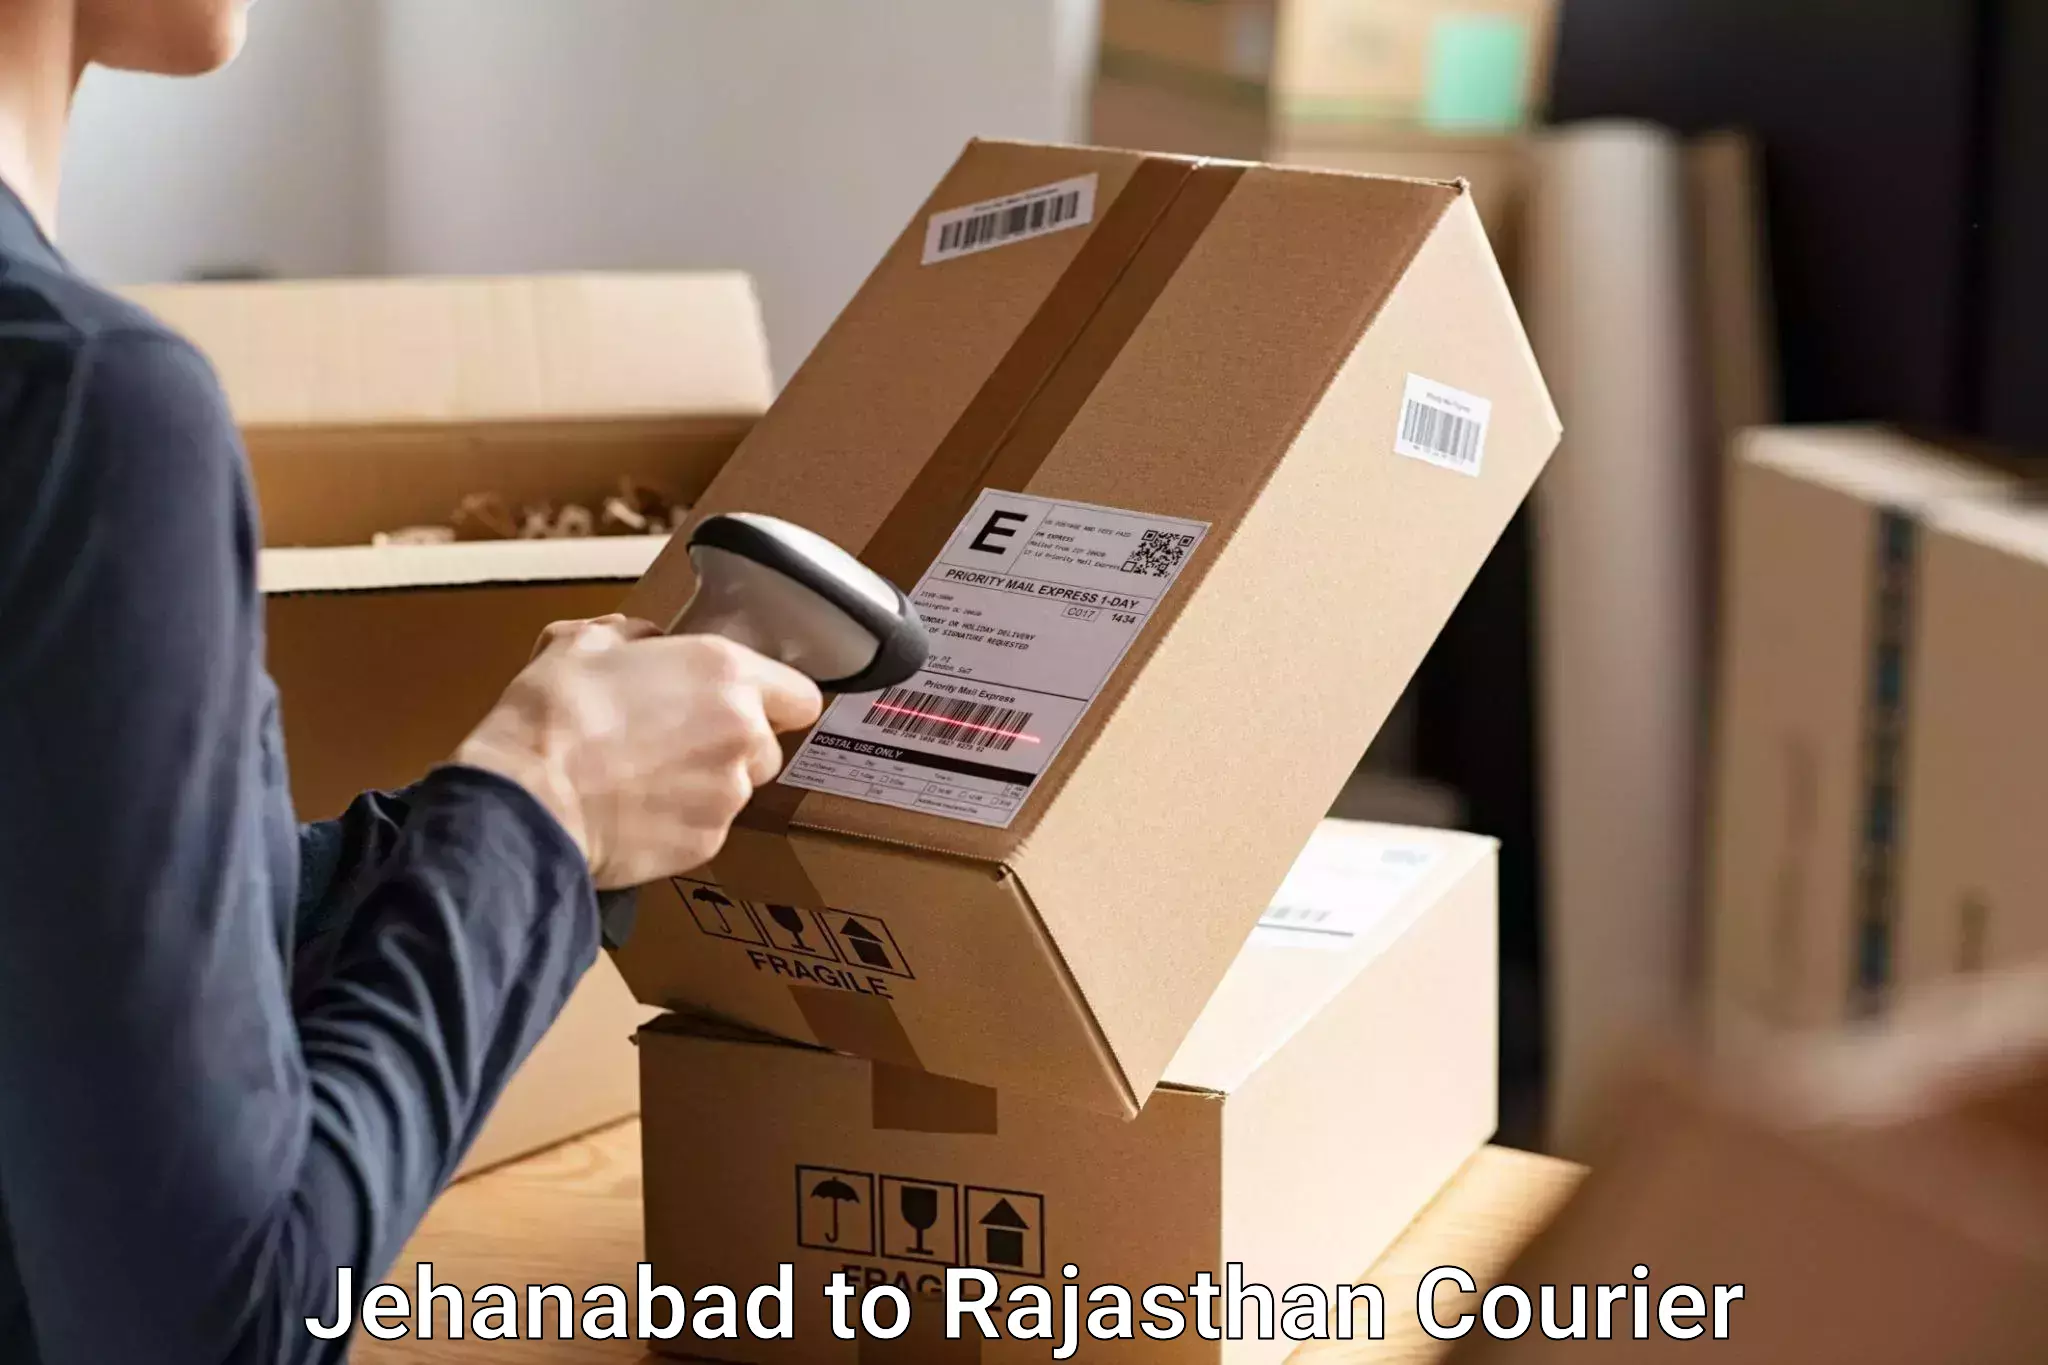 Luggage shipping specialists Jehanabad to Jaipur